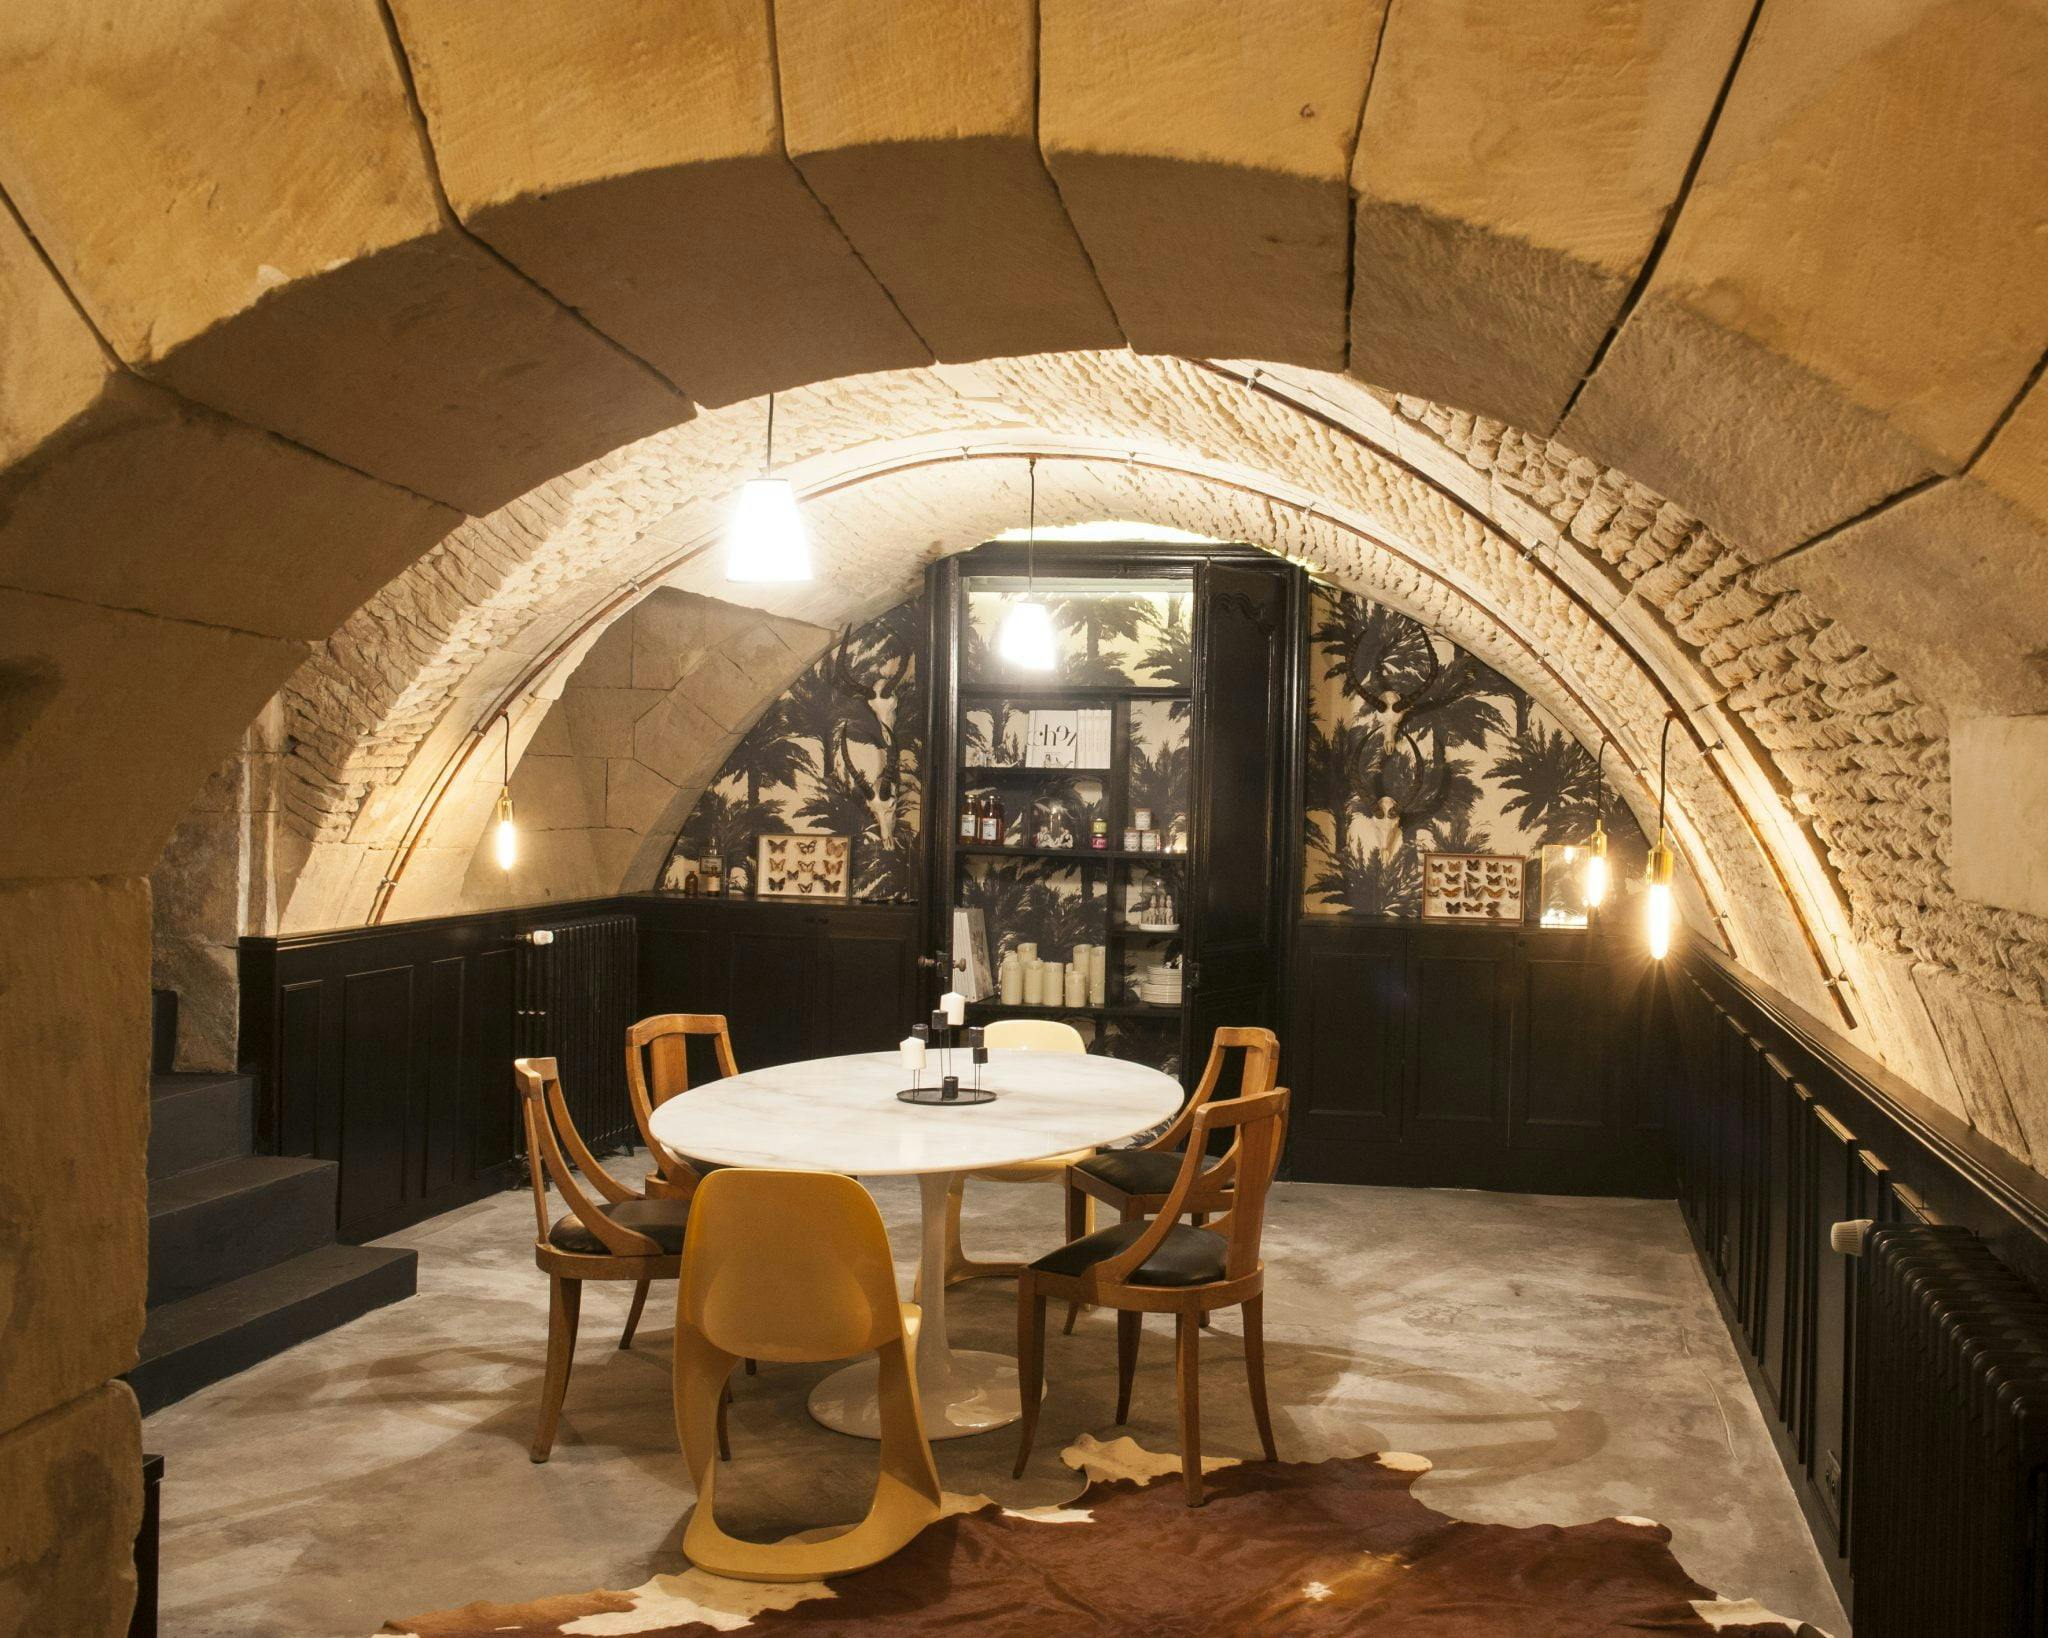 The dining room of the cellar.